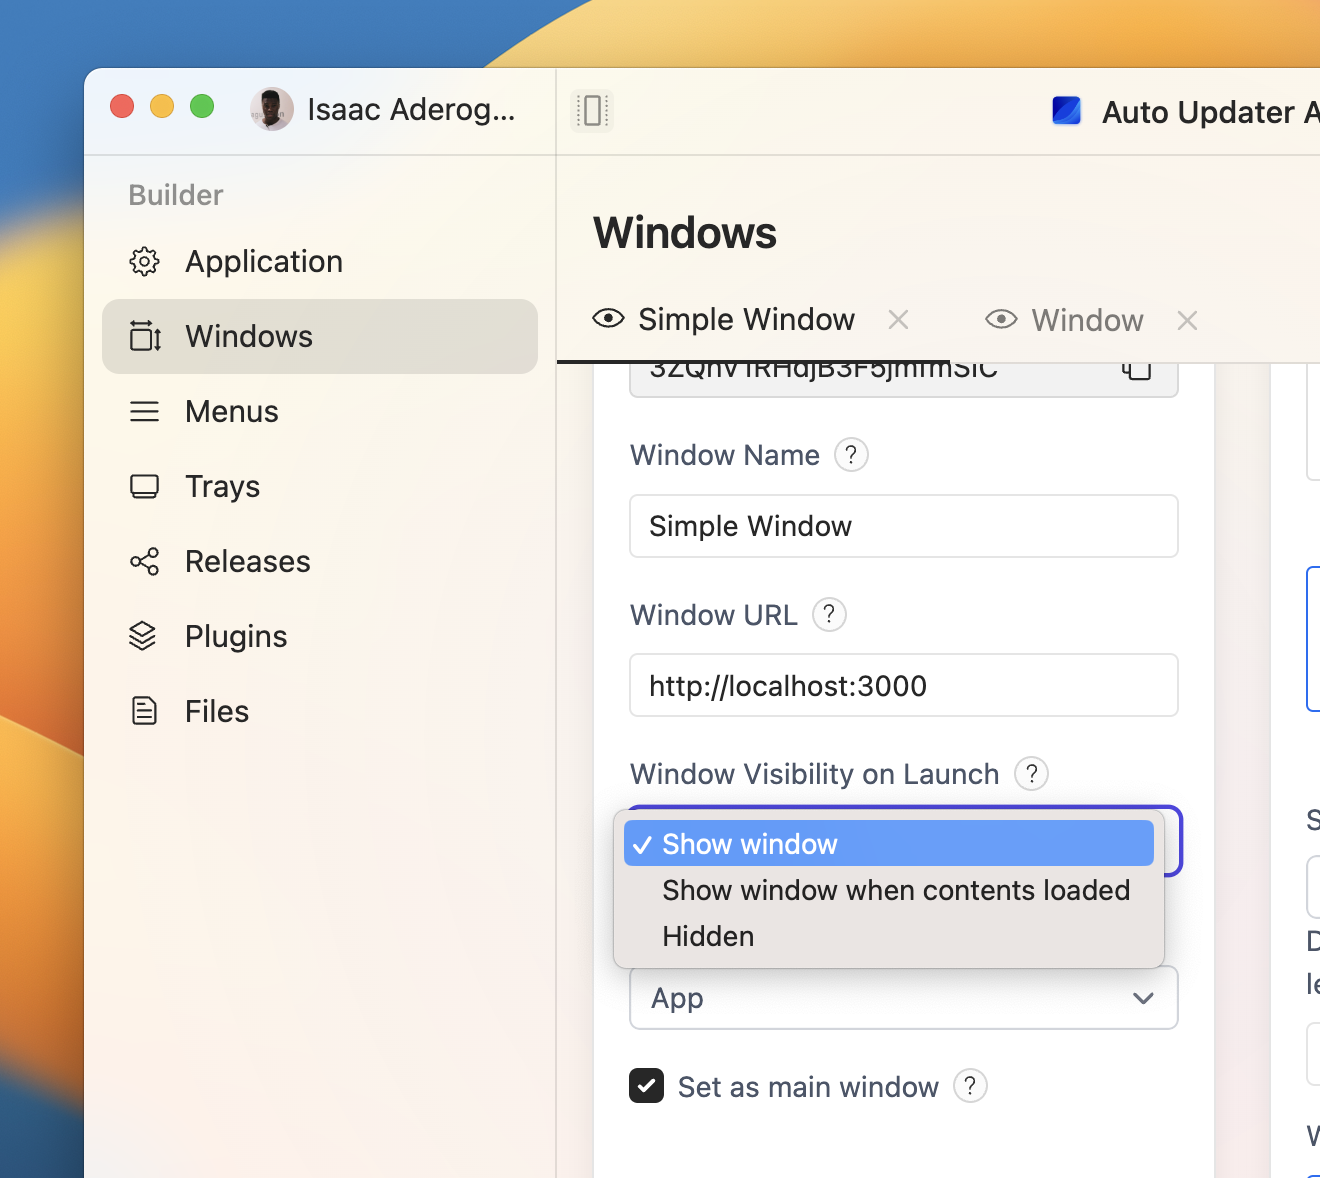 Settings for configuring a window's visibility on launch